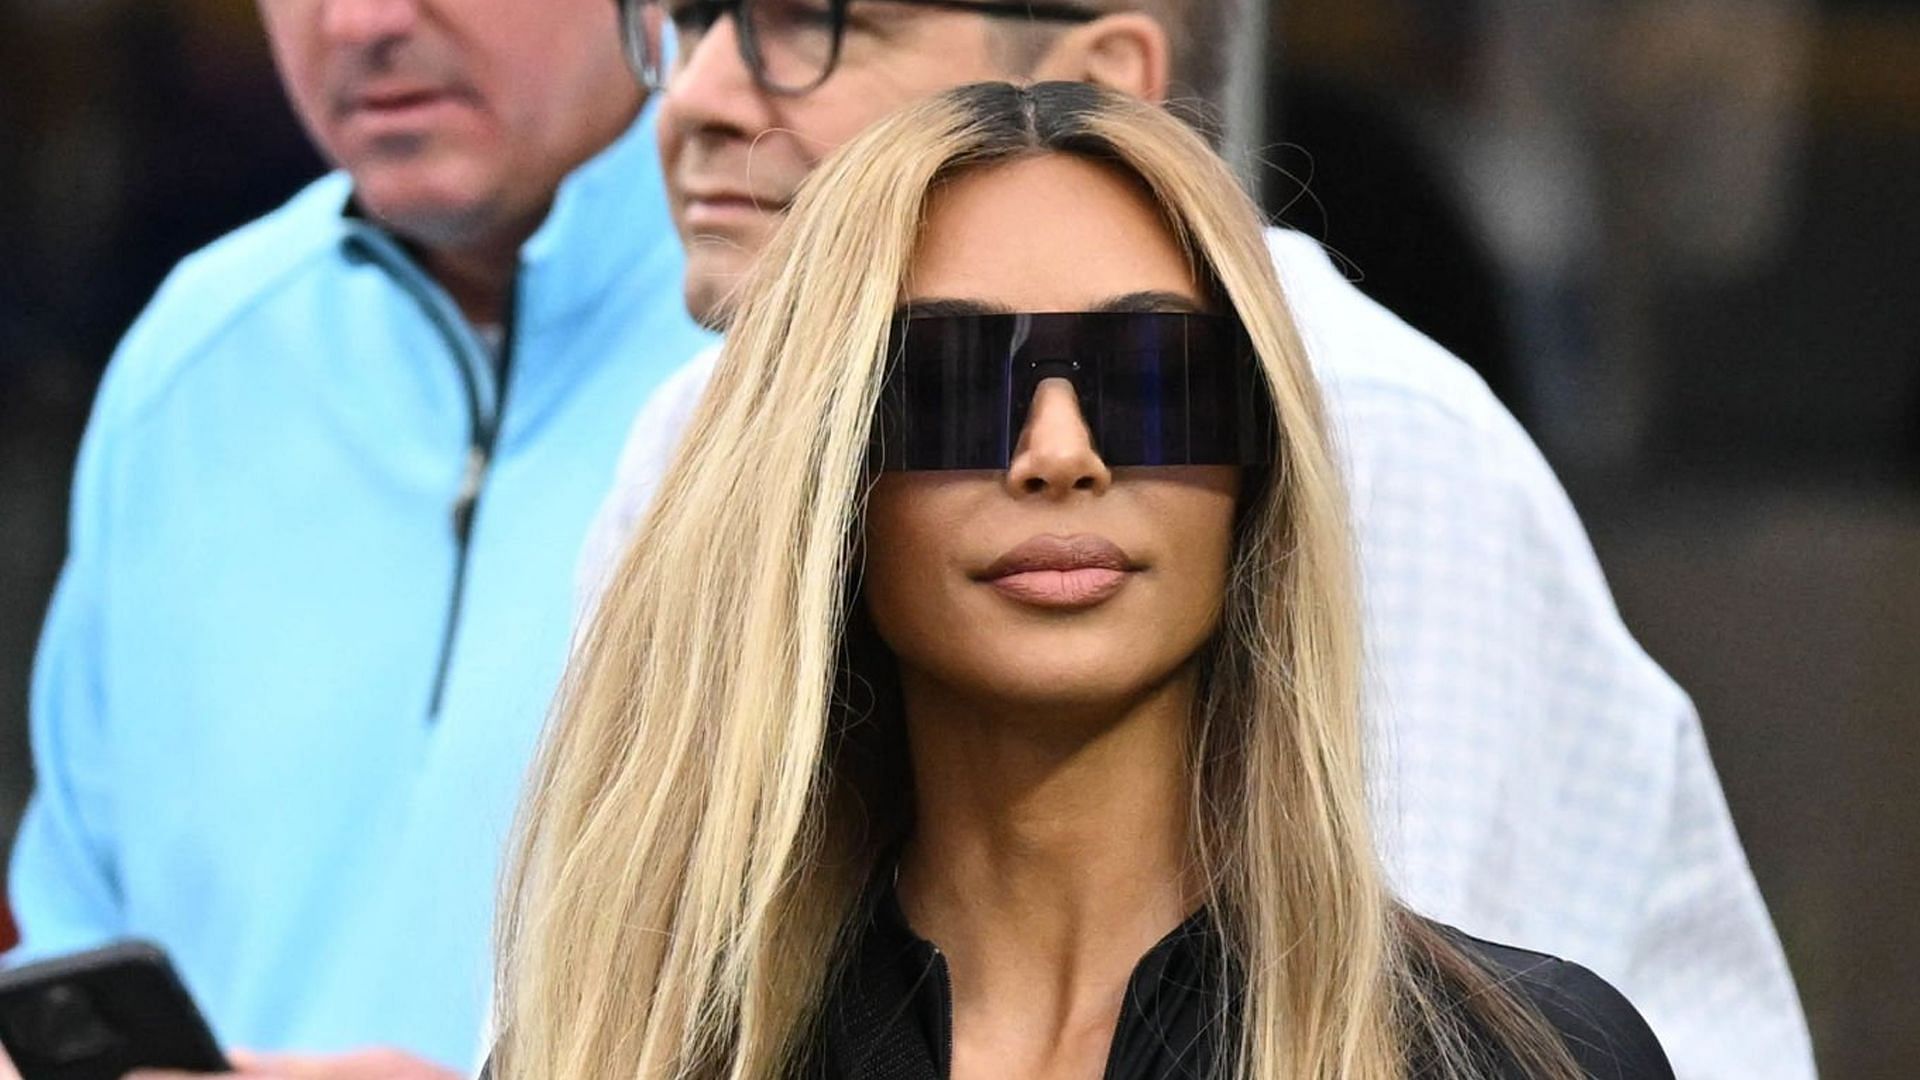 Kim Kardashian gives guest lecture at Harvard Business School (Image via Getty Images)